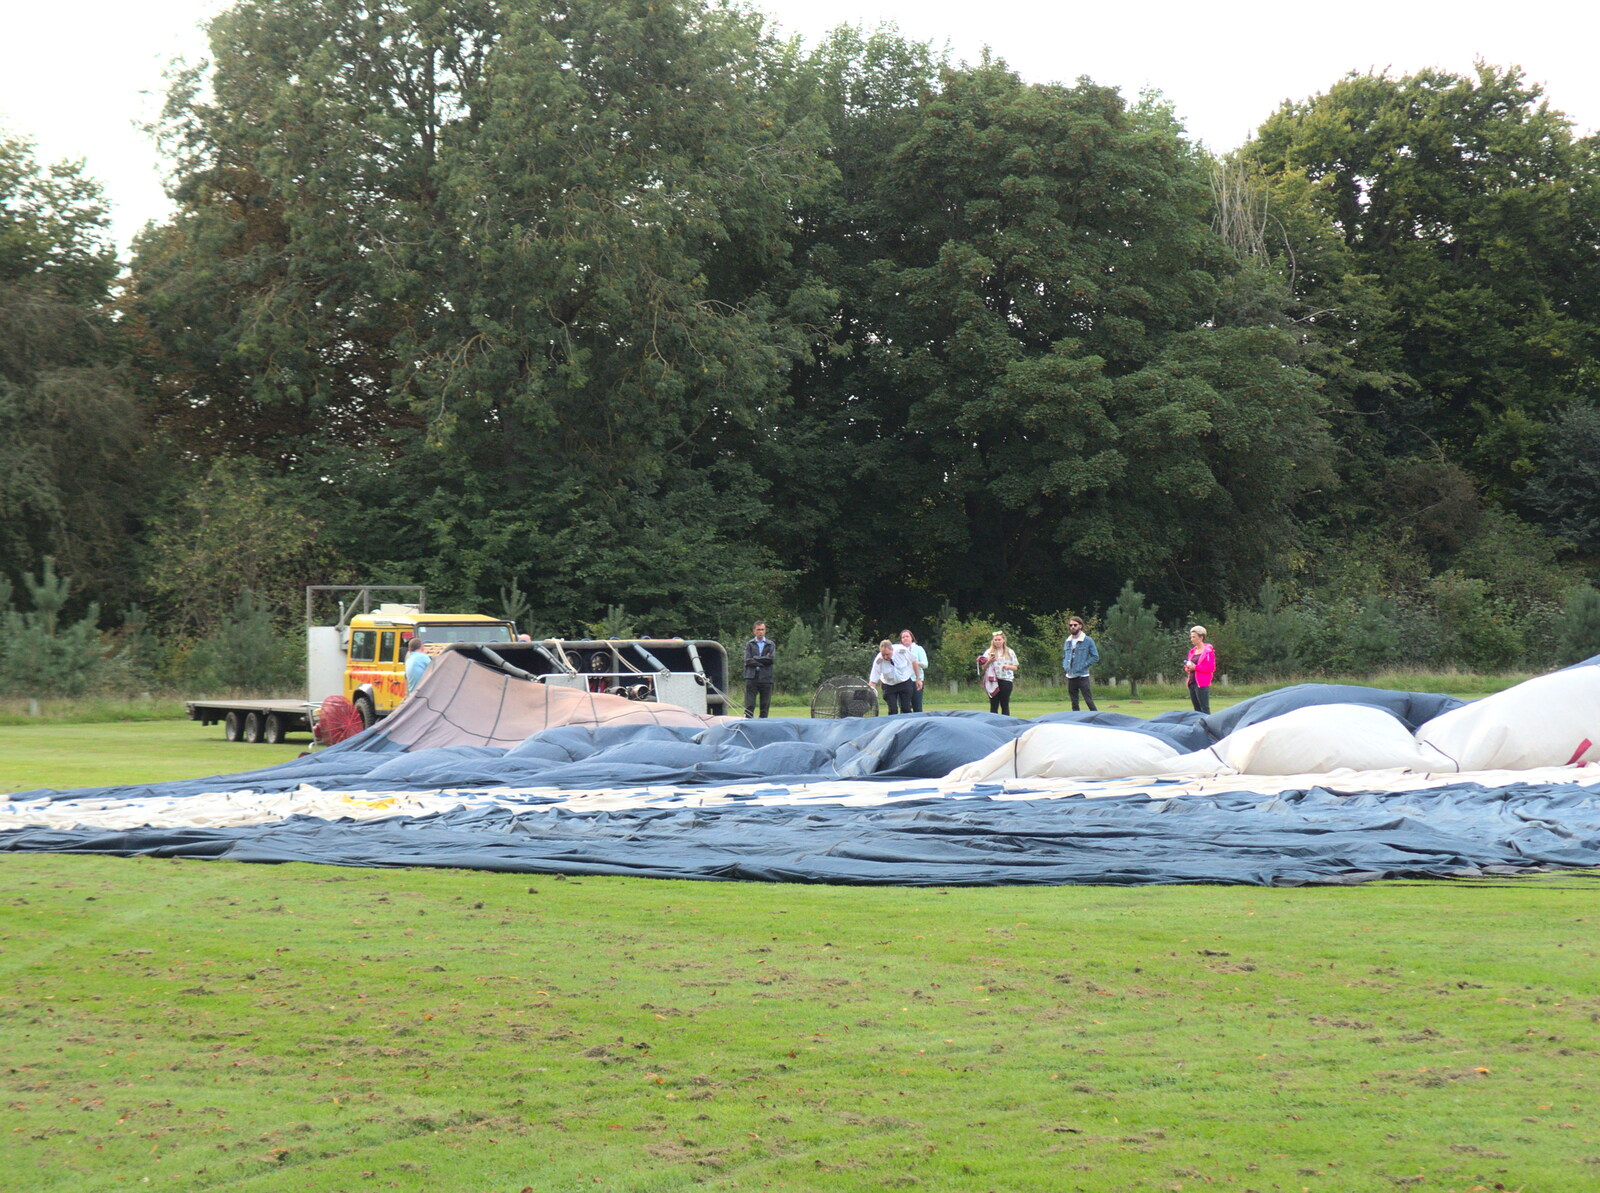 The BSCC at Yaxley and the Hoxne Beer Festival, Suffolk - 31st August 2017: Another balloon is prepared